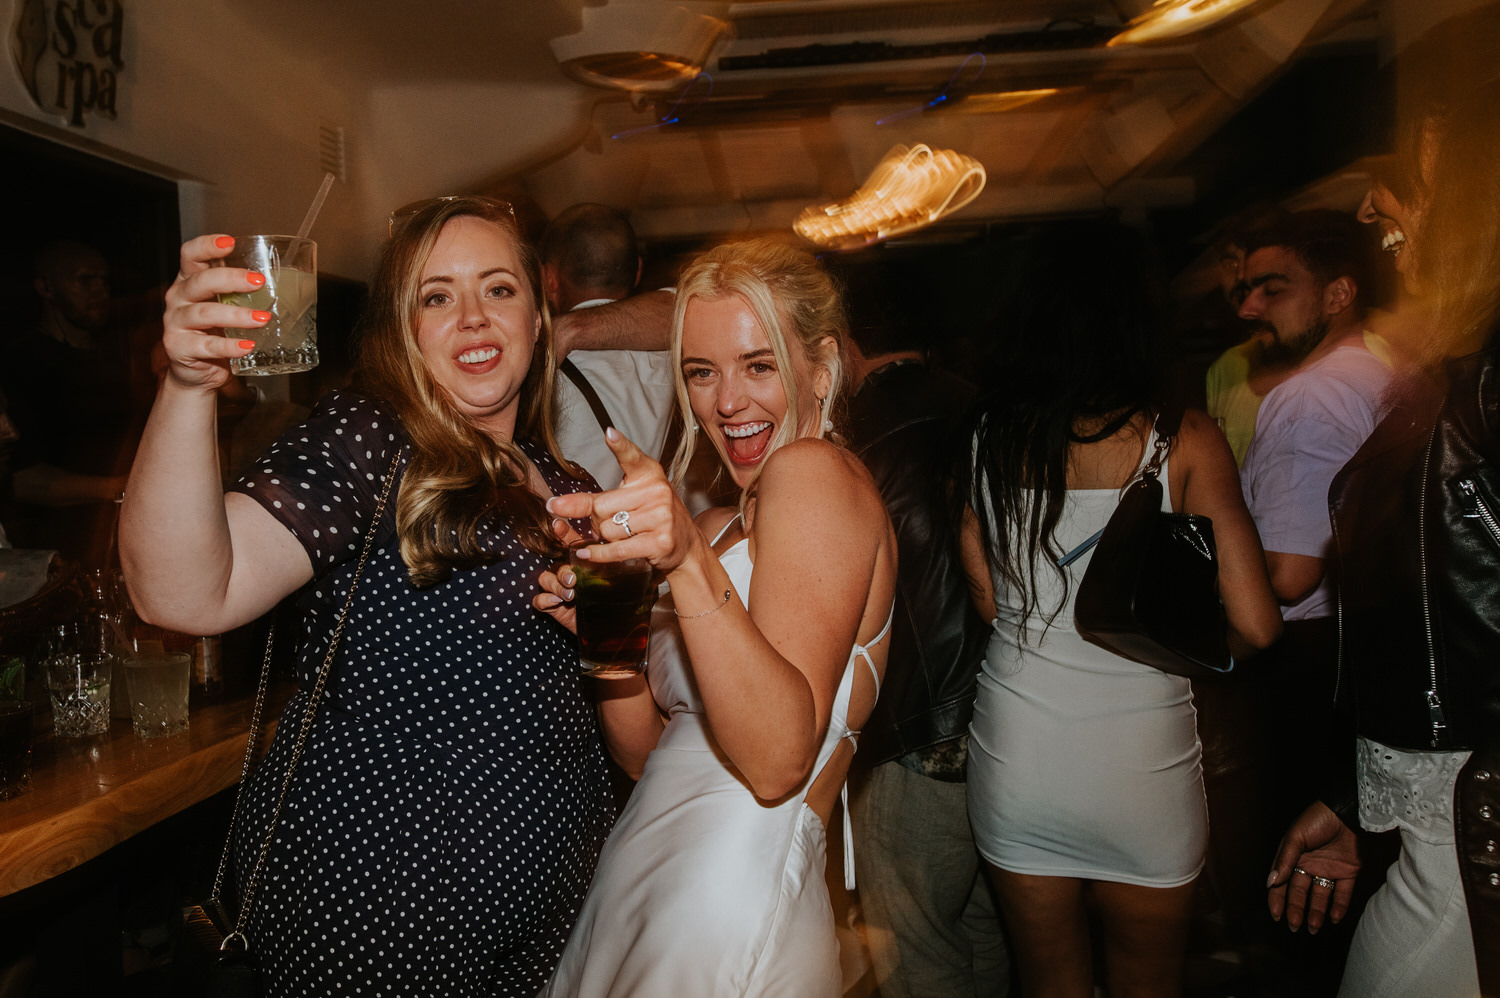 Mykonos wedding photographer: bride and a friend giving us the feels of the night on the dance floor.